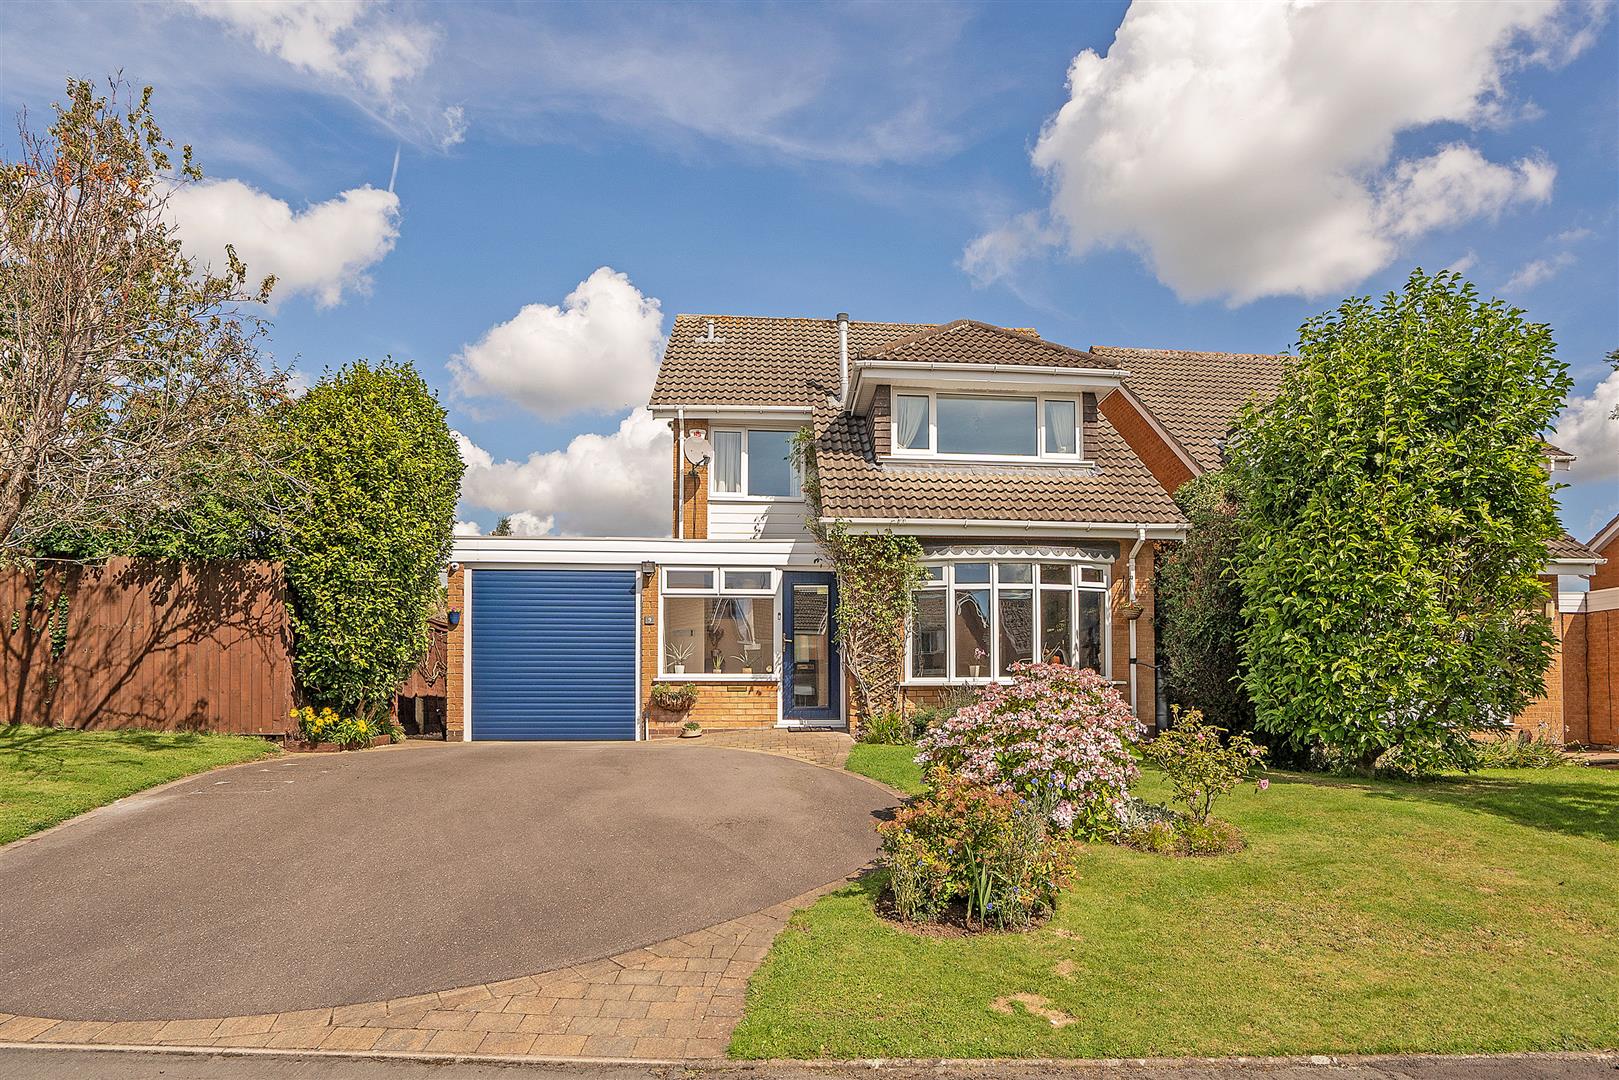 4 bed detached house for sale in Gainsborough Crescent, Knowle  - Property Image 1